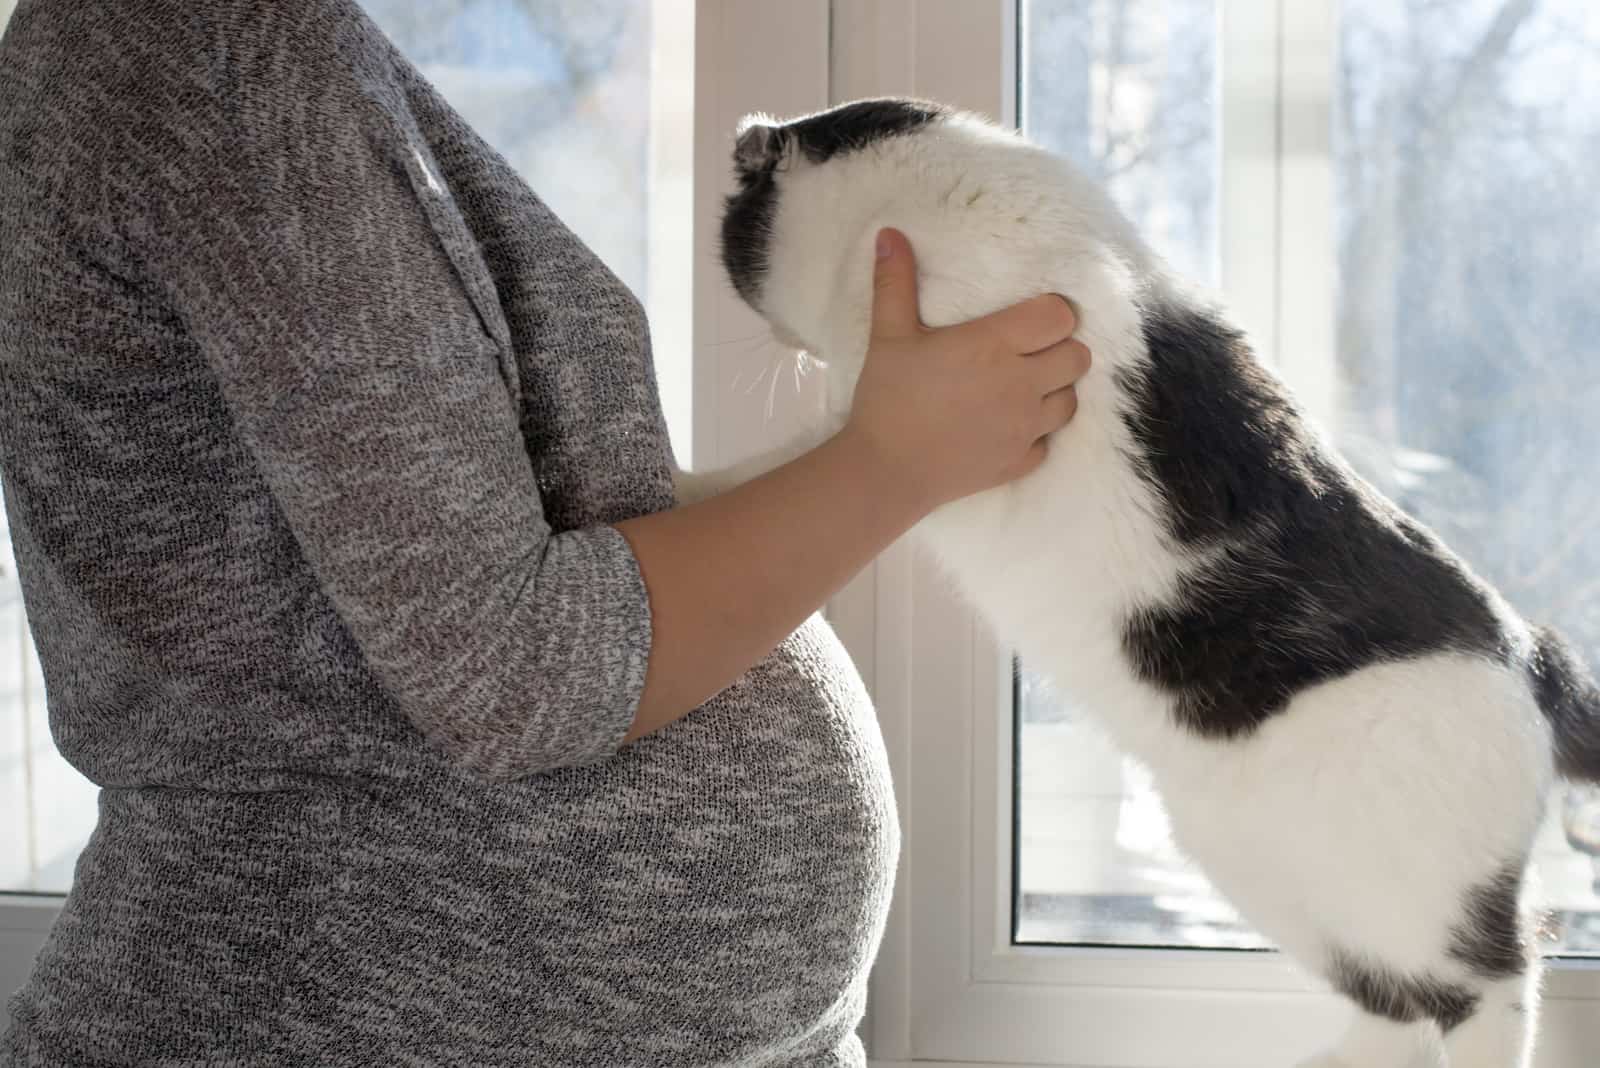 Pregnant woman and cat